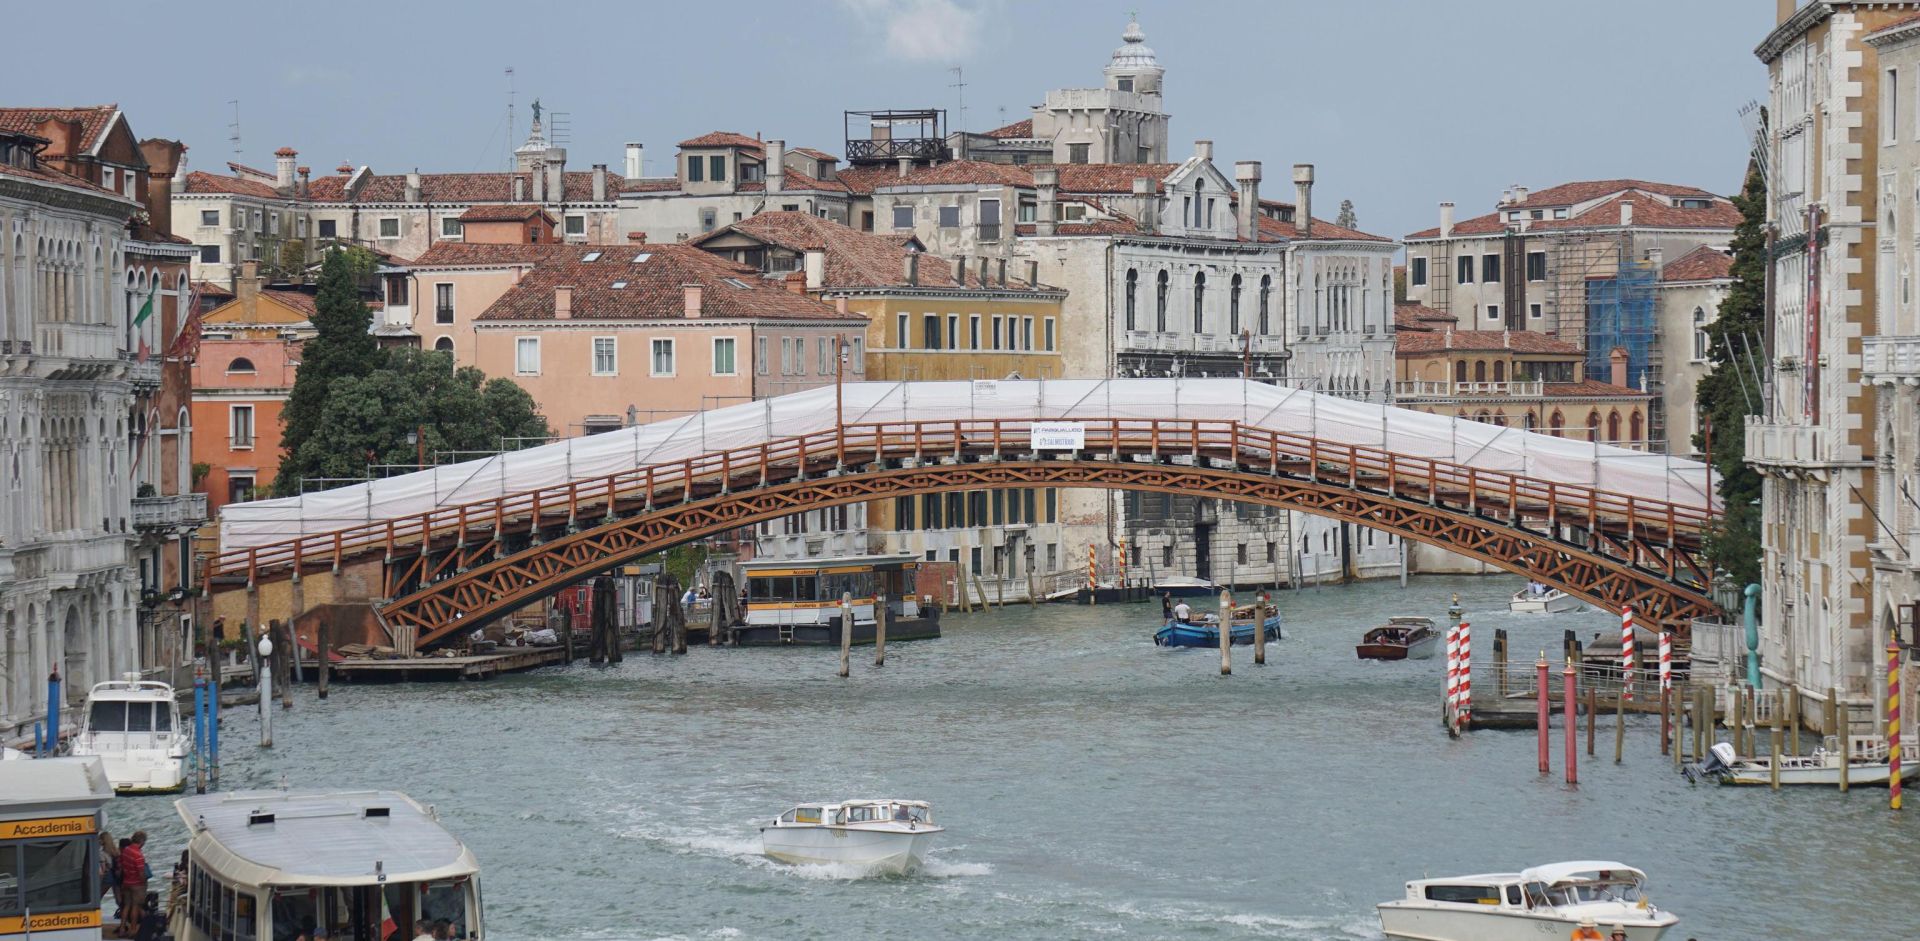 epa06970755 A view of the Ponte dell'Accademia bridge, between the two banks of the Grand Canal (Canale Grande) after its renovation works, in Venice, northern Italy, 25 August 2018. The bridge will be reopened on 29 August 2018, after restoration works, with a re-opening ceremony.  EPA/ANDREA MEROLA